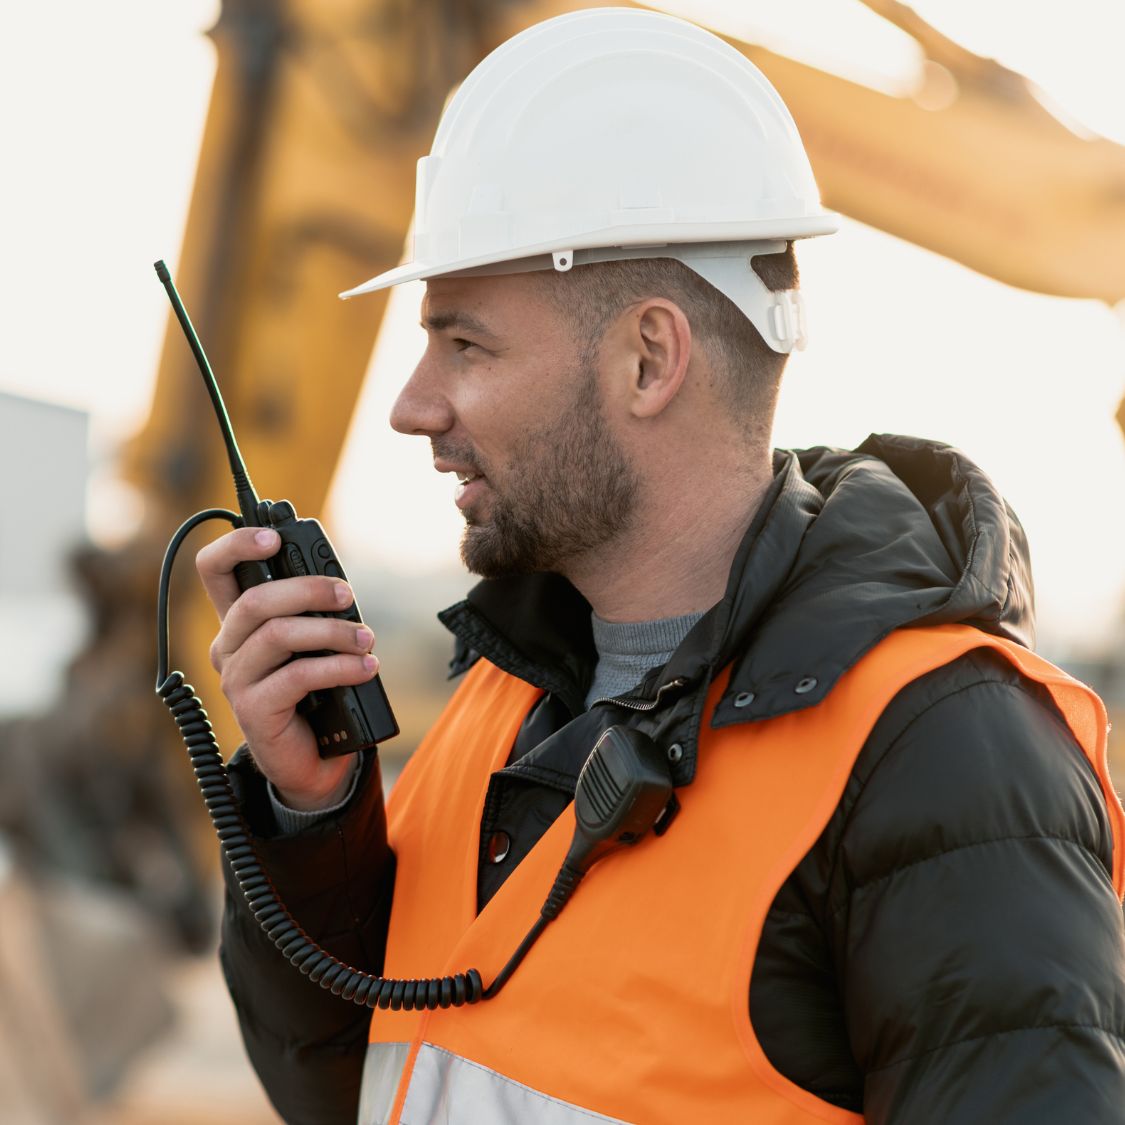 Reasons To Use Two-Way Radios on Construction Job Sites